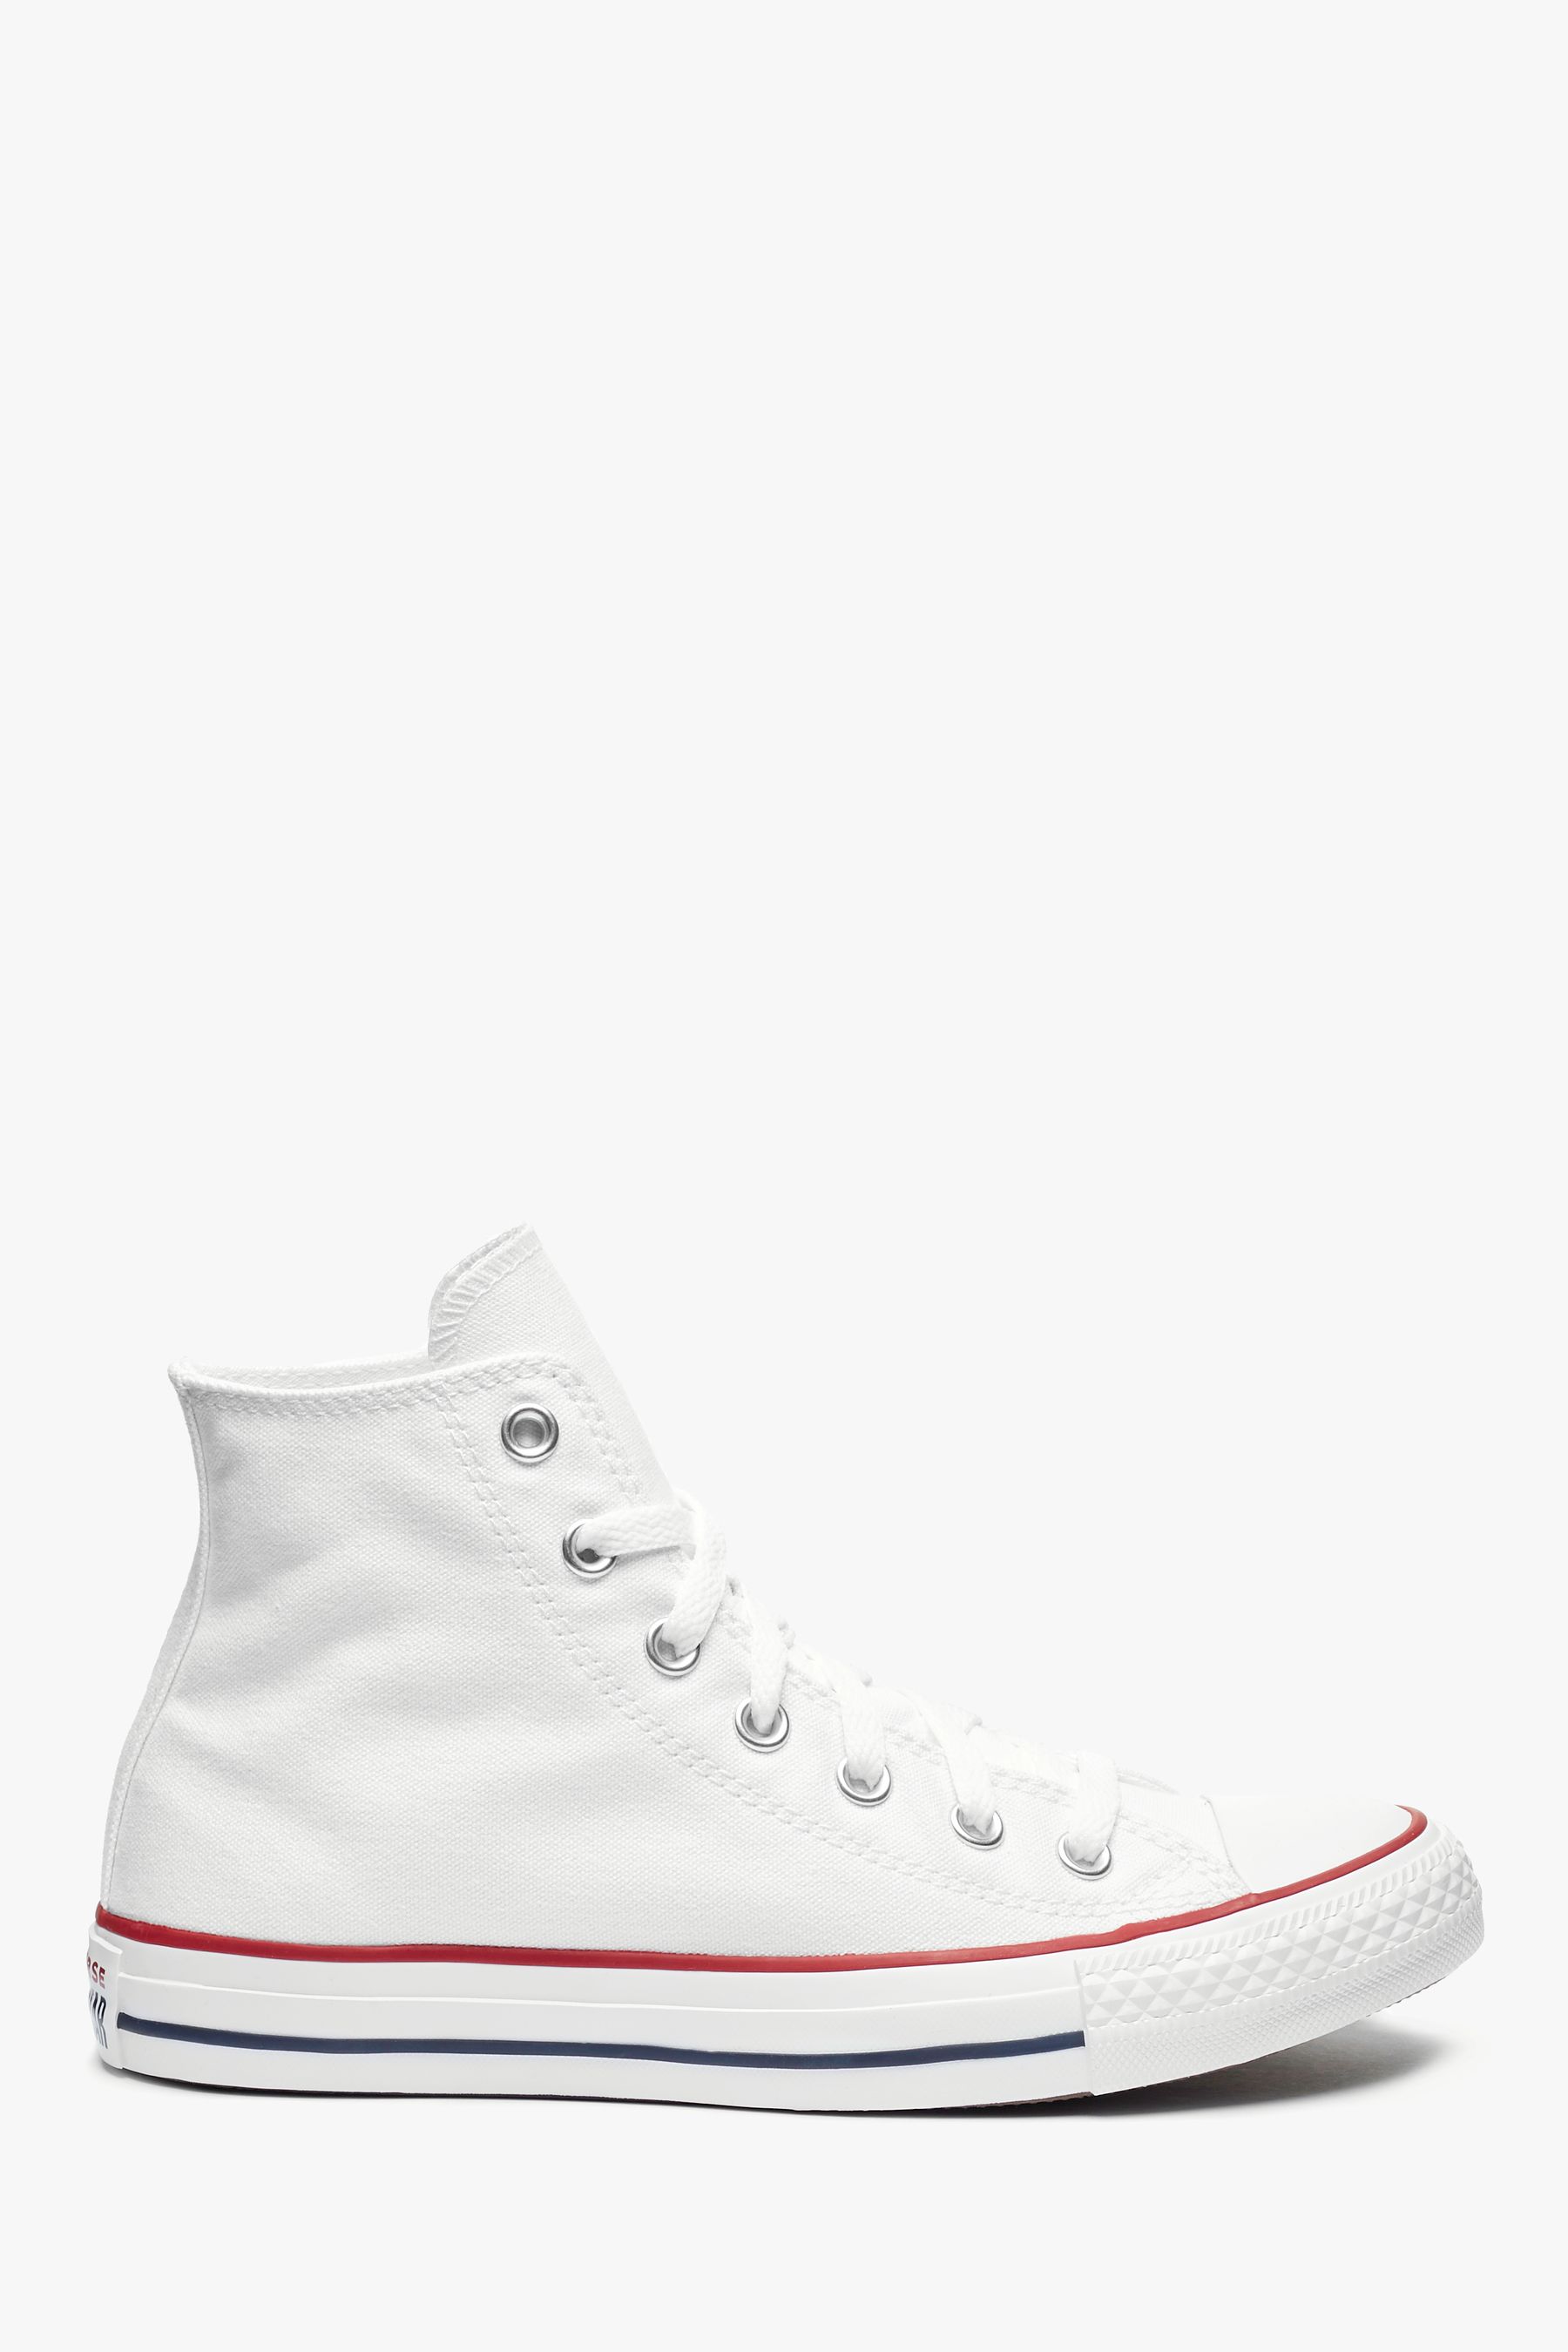 Buy Converse White Regular Fit Chuck Taylor All Star High Trainers from ...